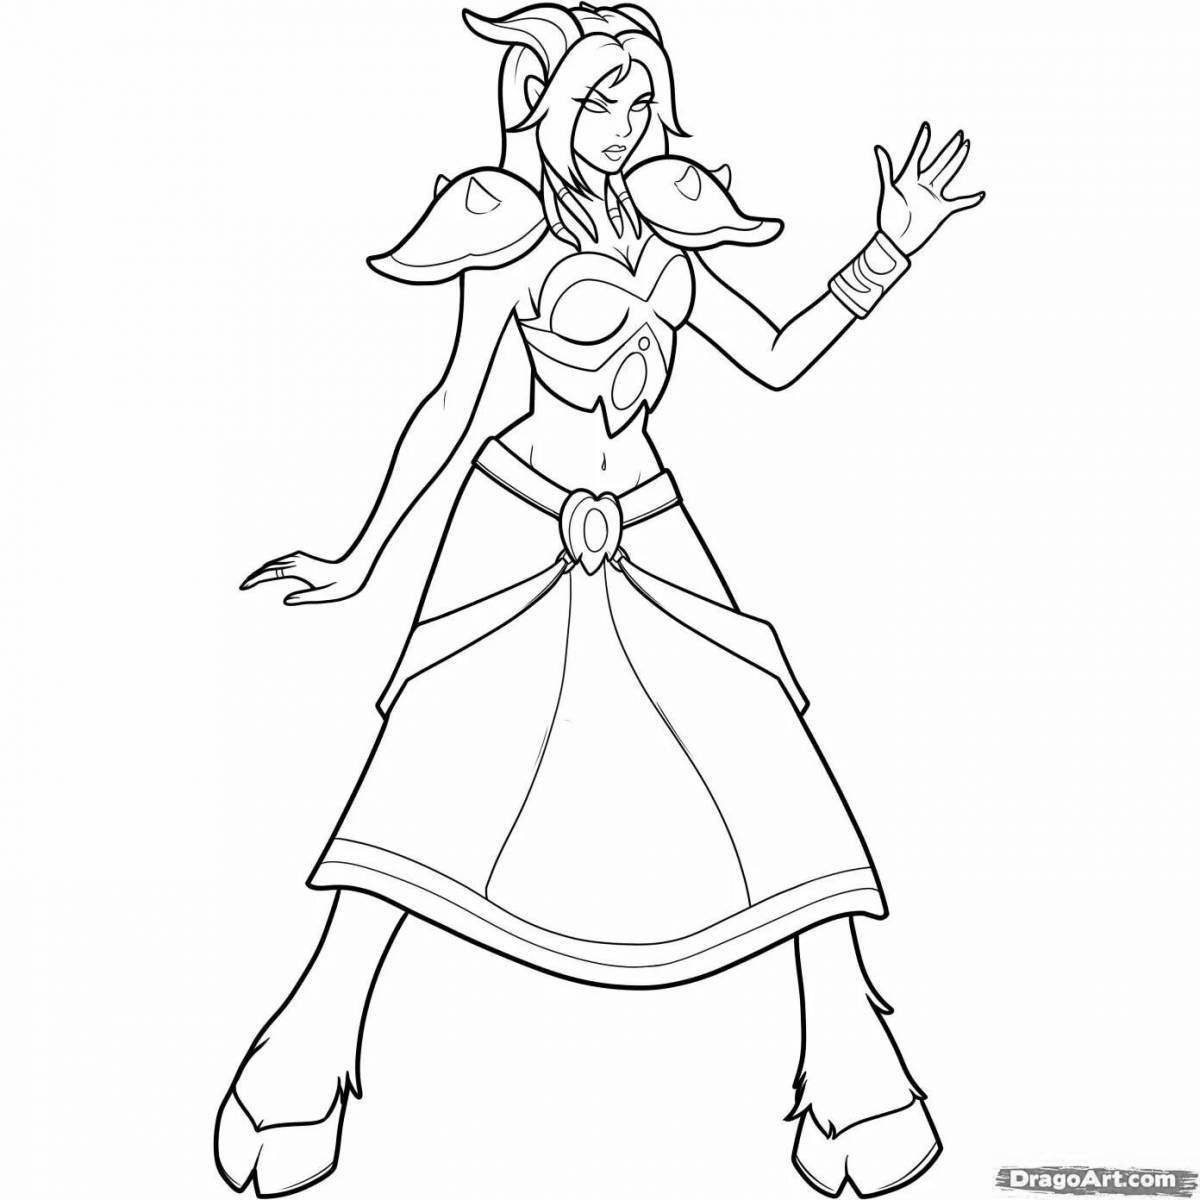 Radiant warcraft 3 coloring page